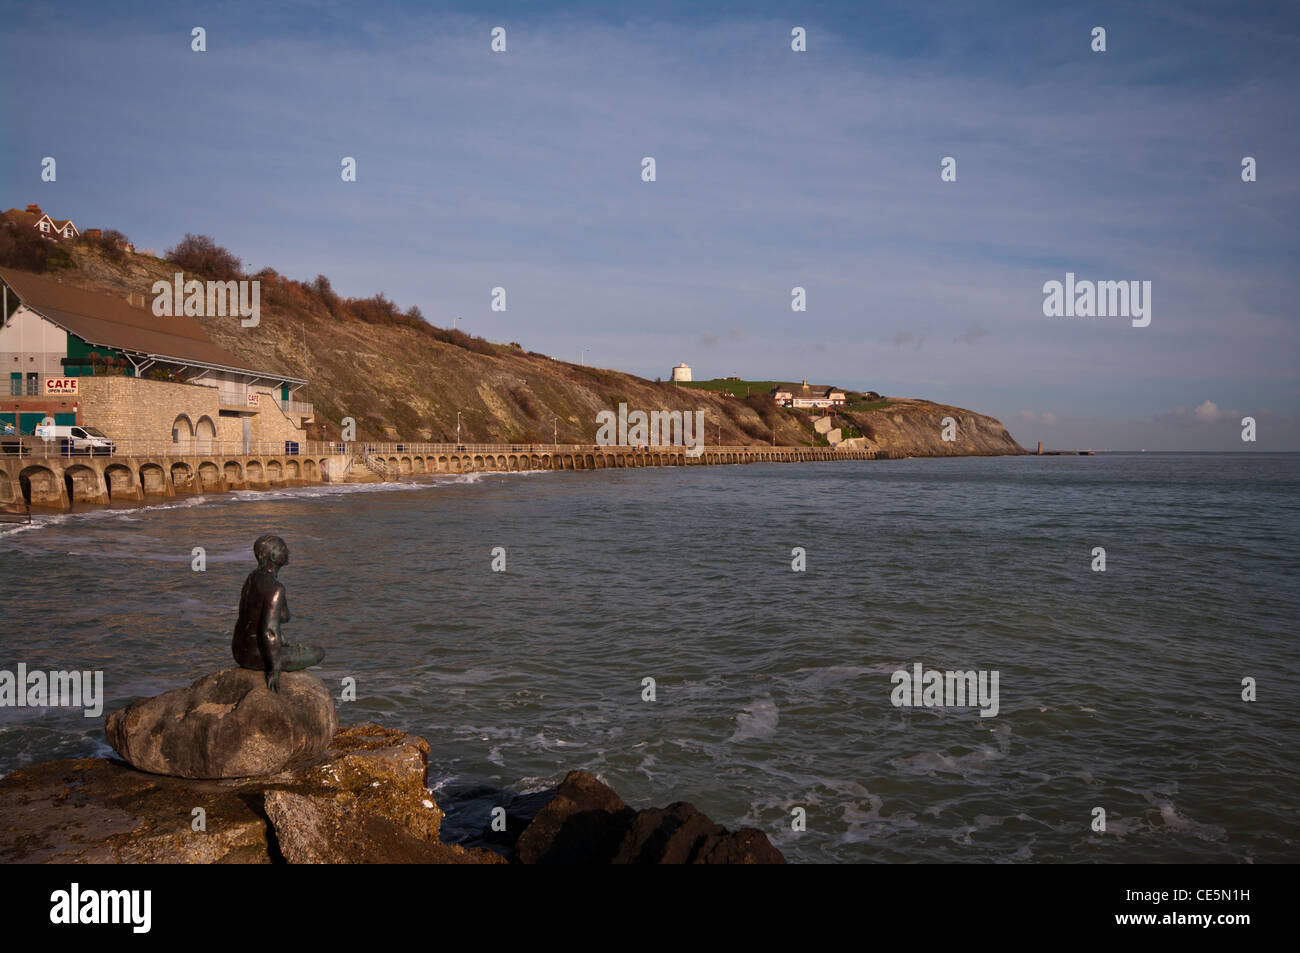 The Little Mermaid Statue On The Waterfront At Folkestone Kent UK Looking towards the sea and the cliffs Stock Photo